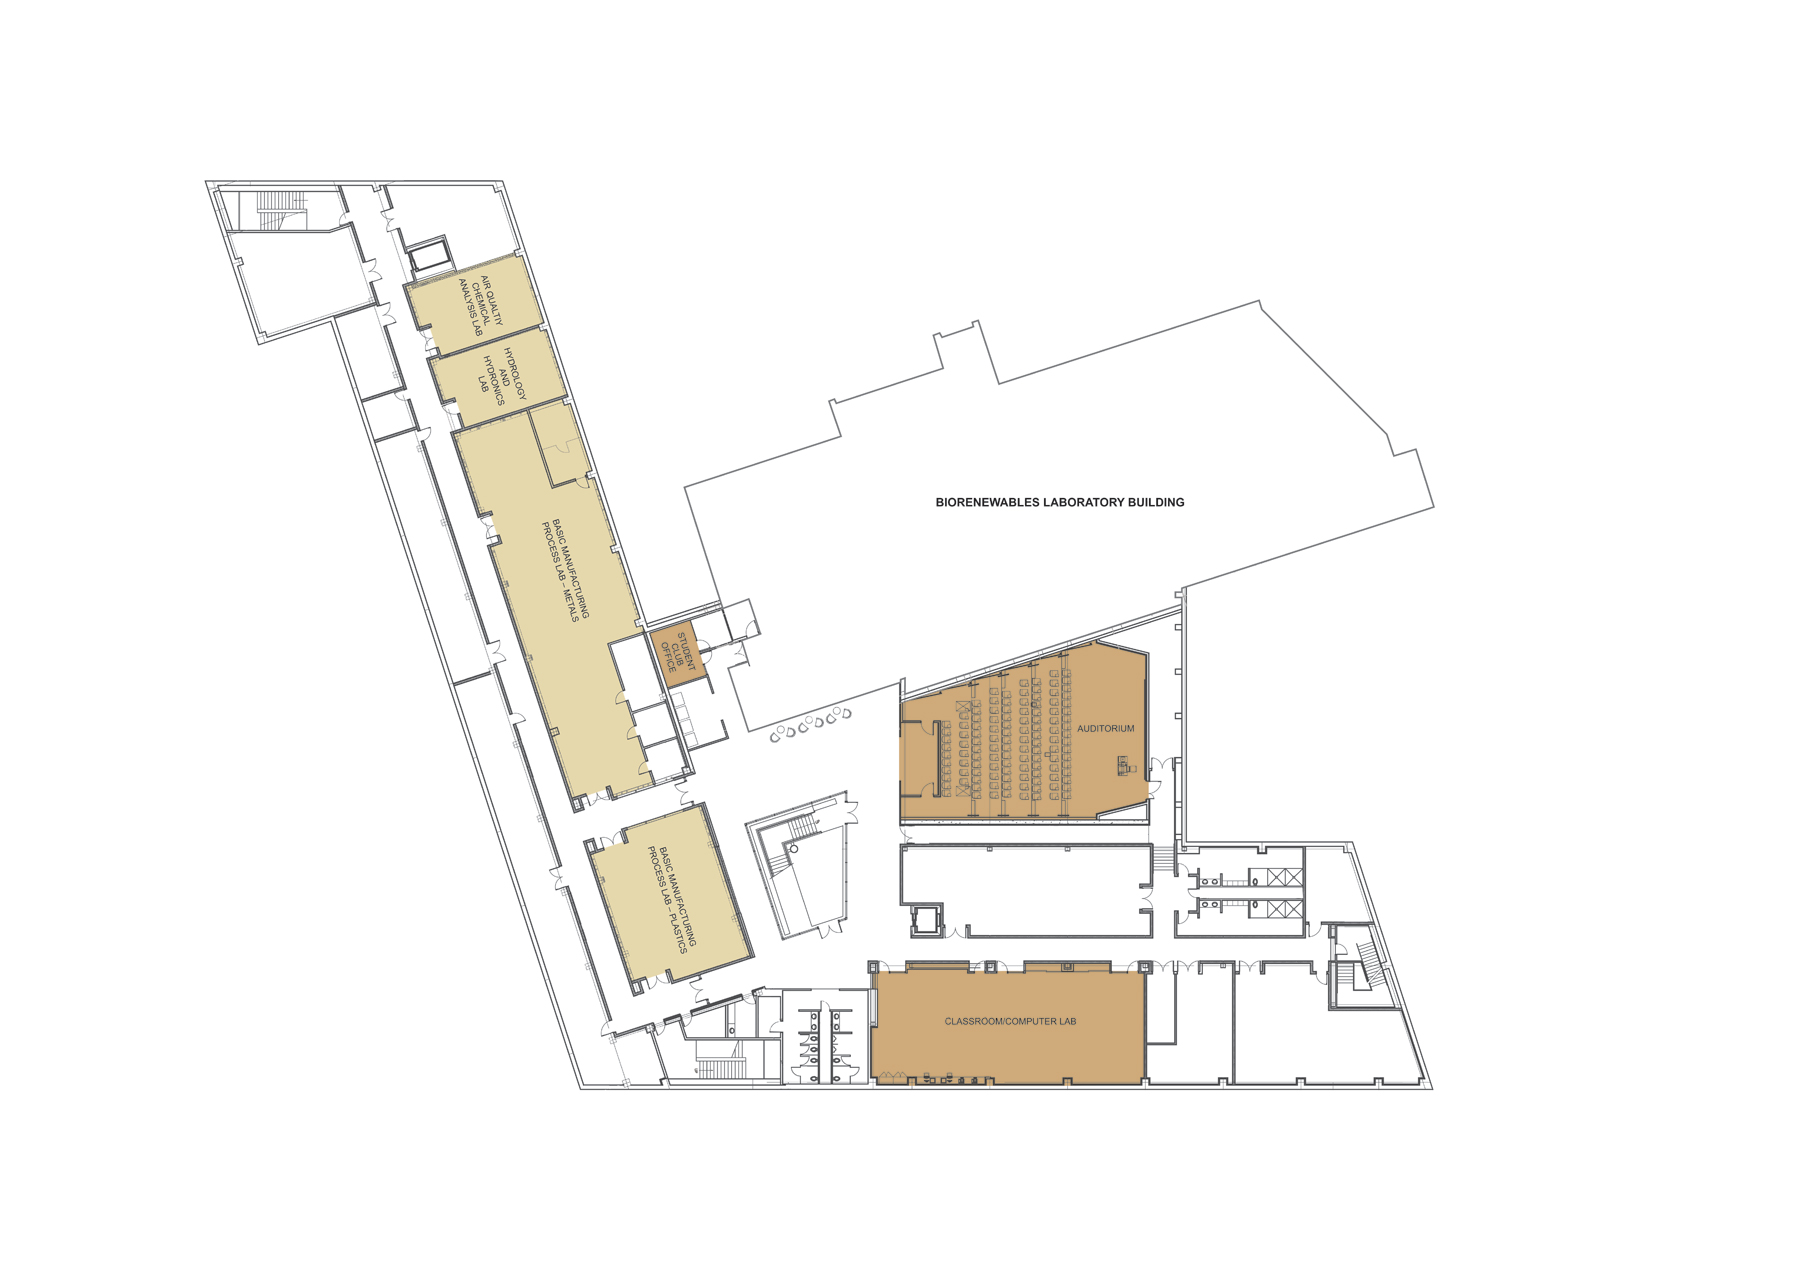 Building Floor Plans • Department of Agricultural and